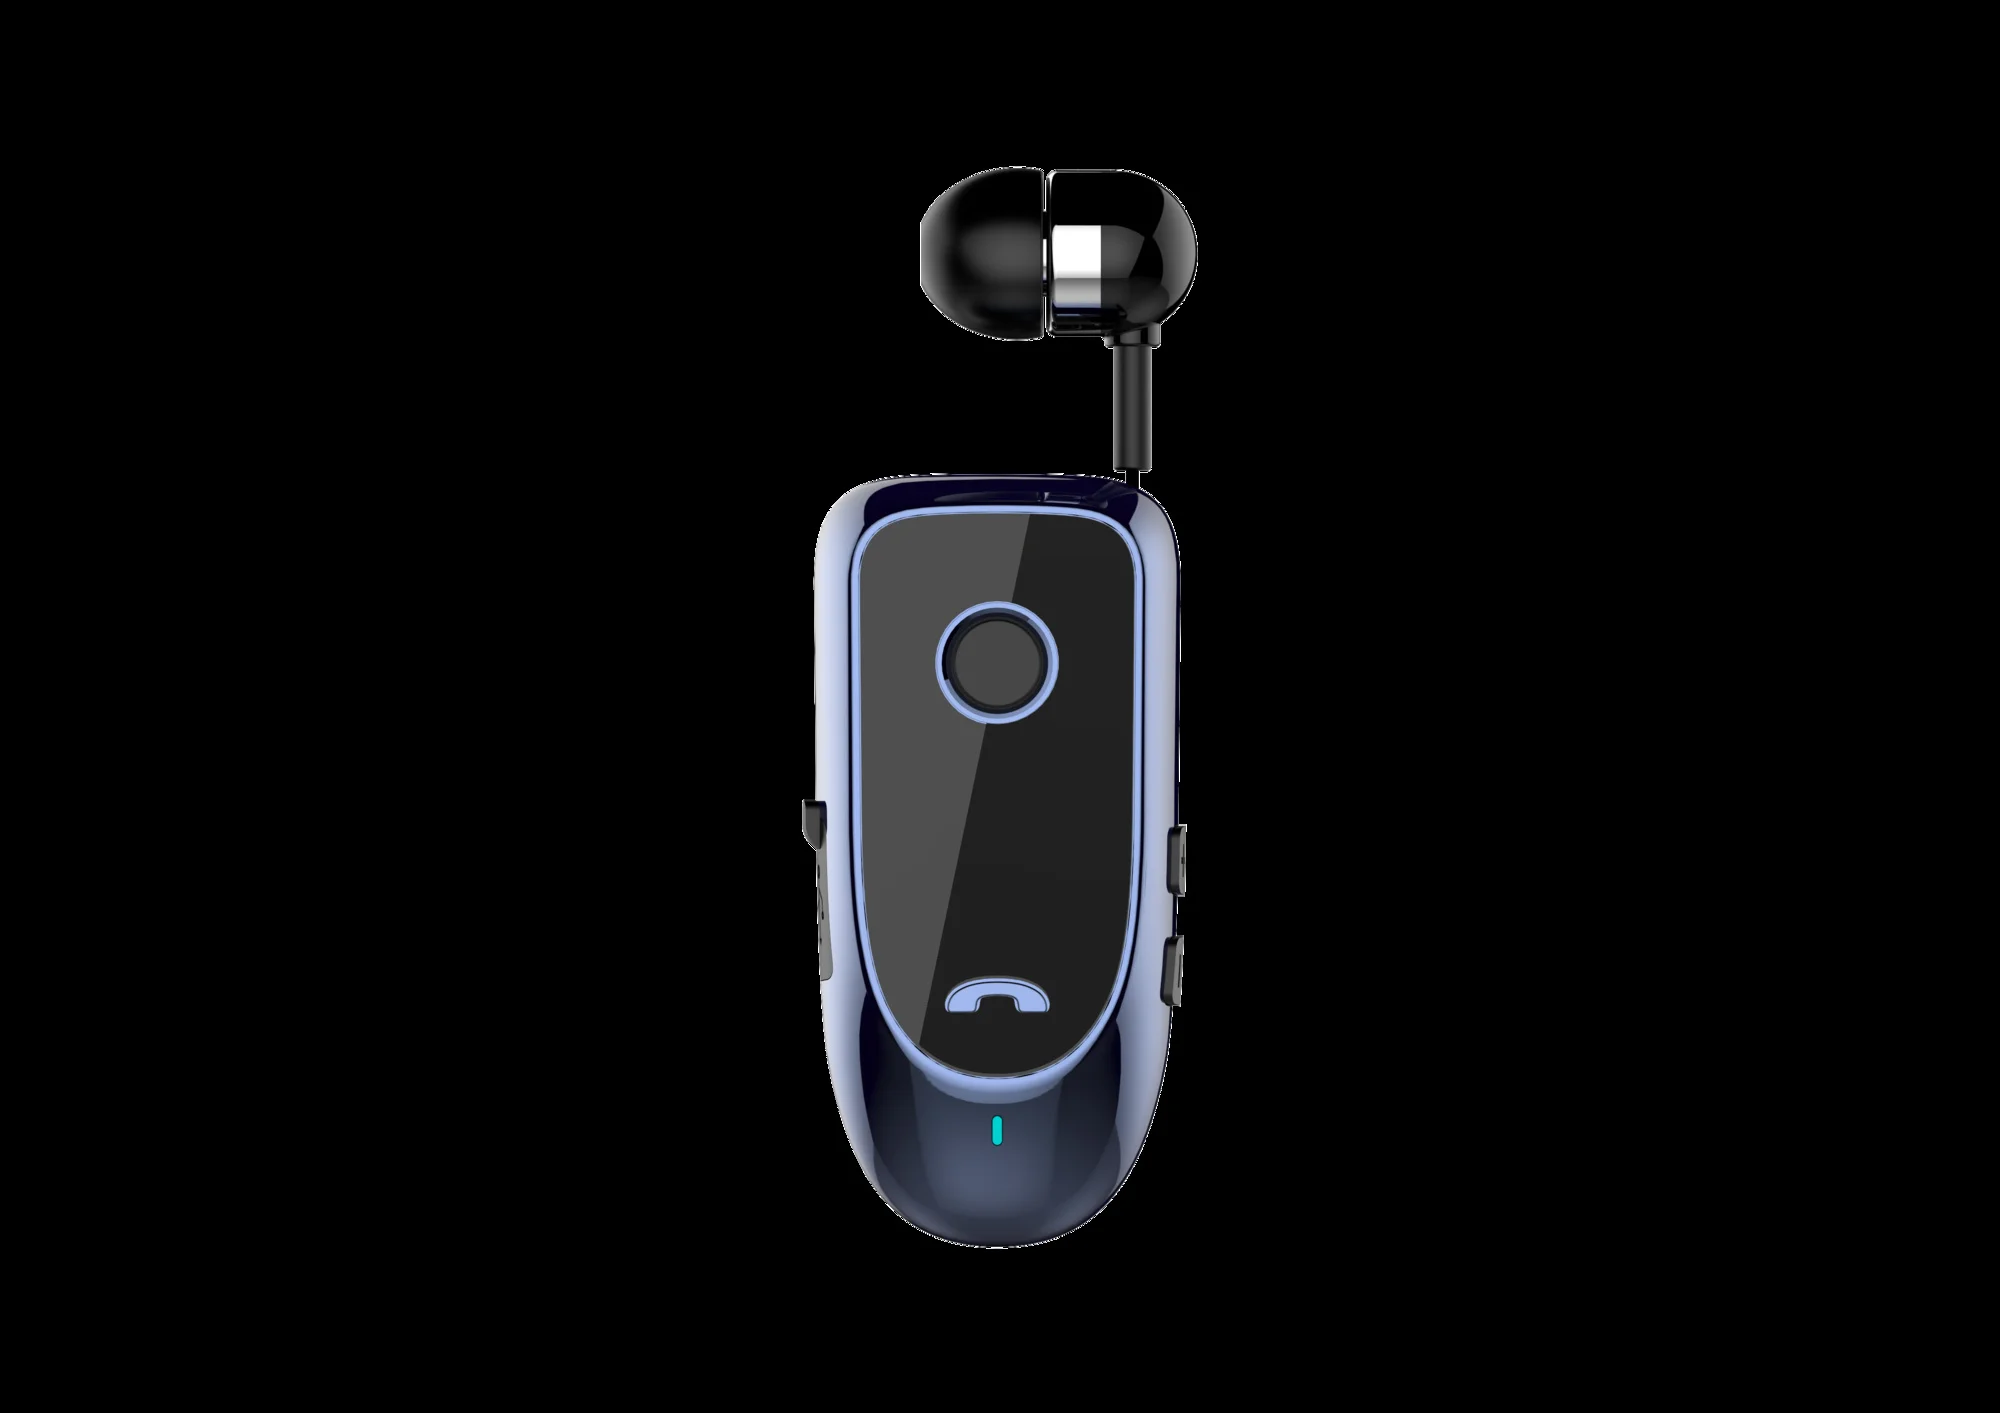 

New2022 2022 mini wireless bluetooth earpiece of the car headphones called remember clip-driver vibration auricular hands free